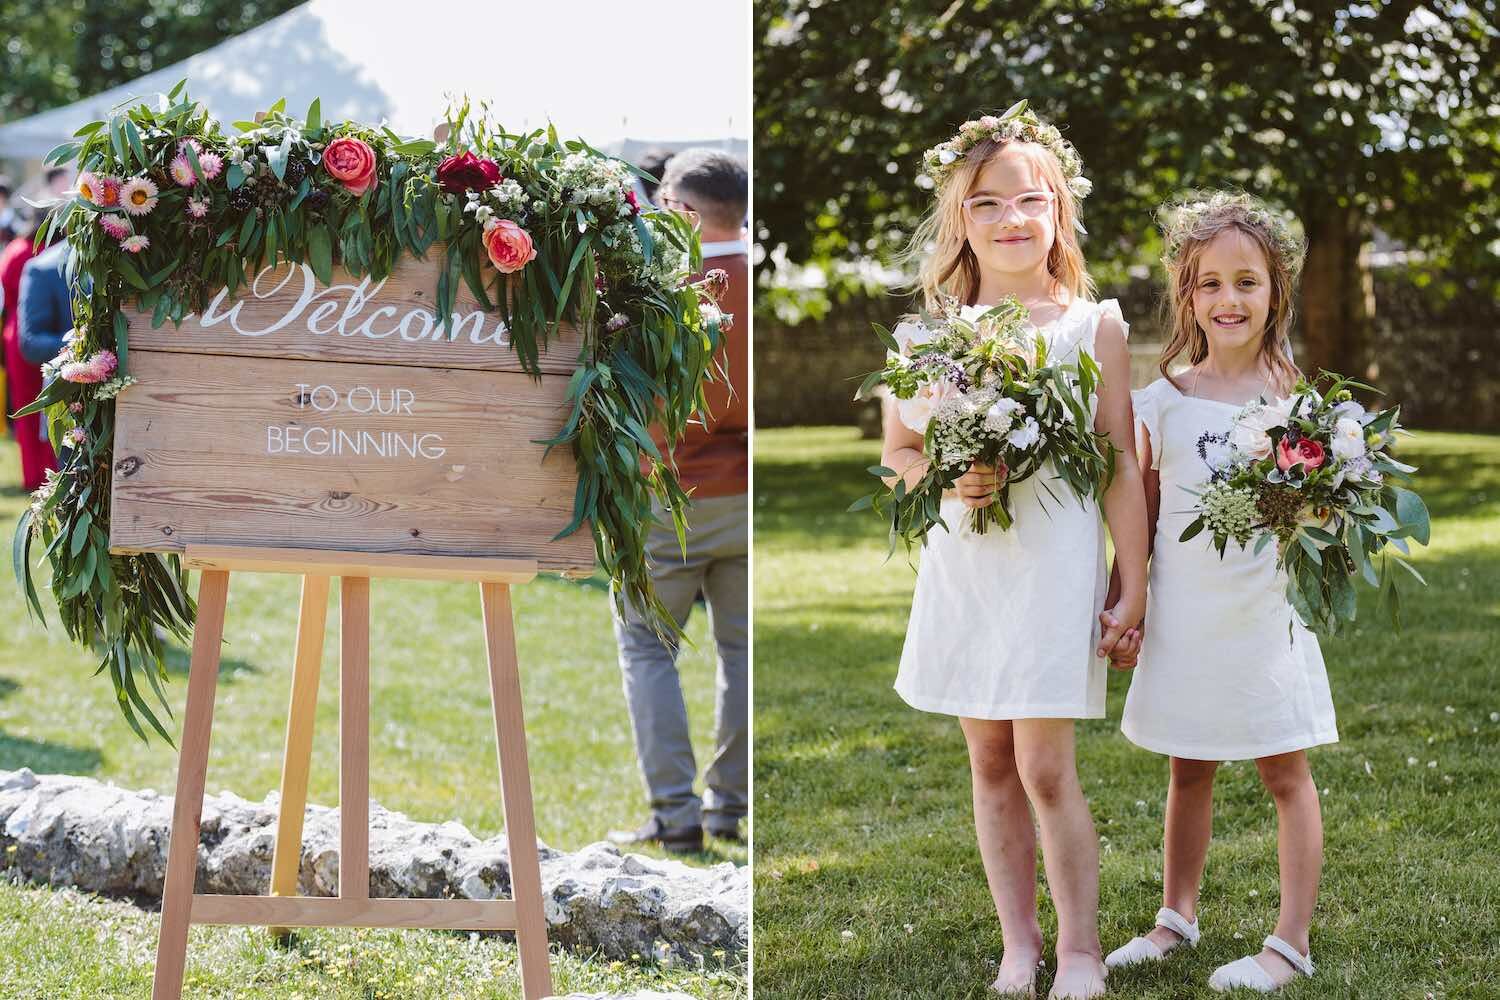 Welcome board with flowers and flower girls